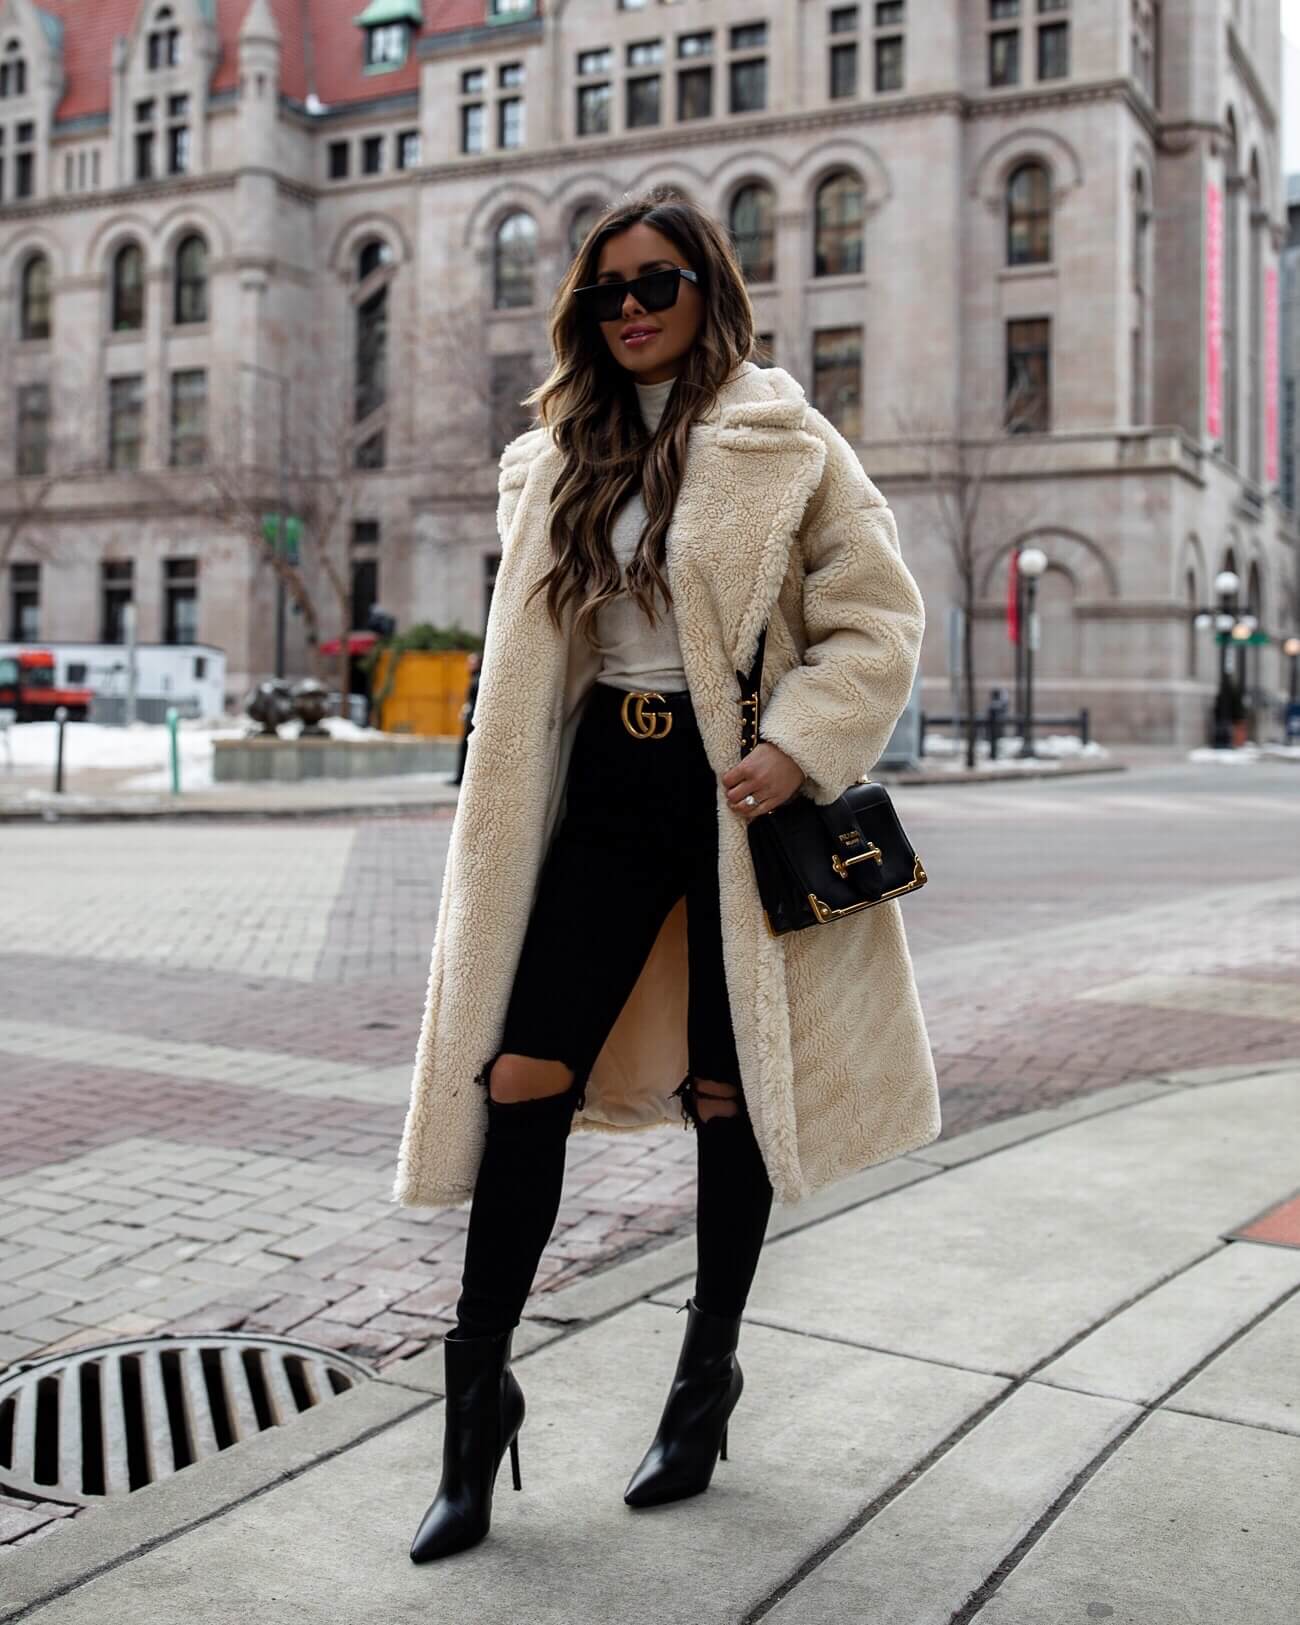 fashion blogger mia mia mine wearing a teddy bear coat with a gucci belt for winter